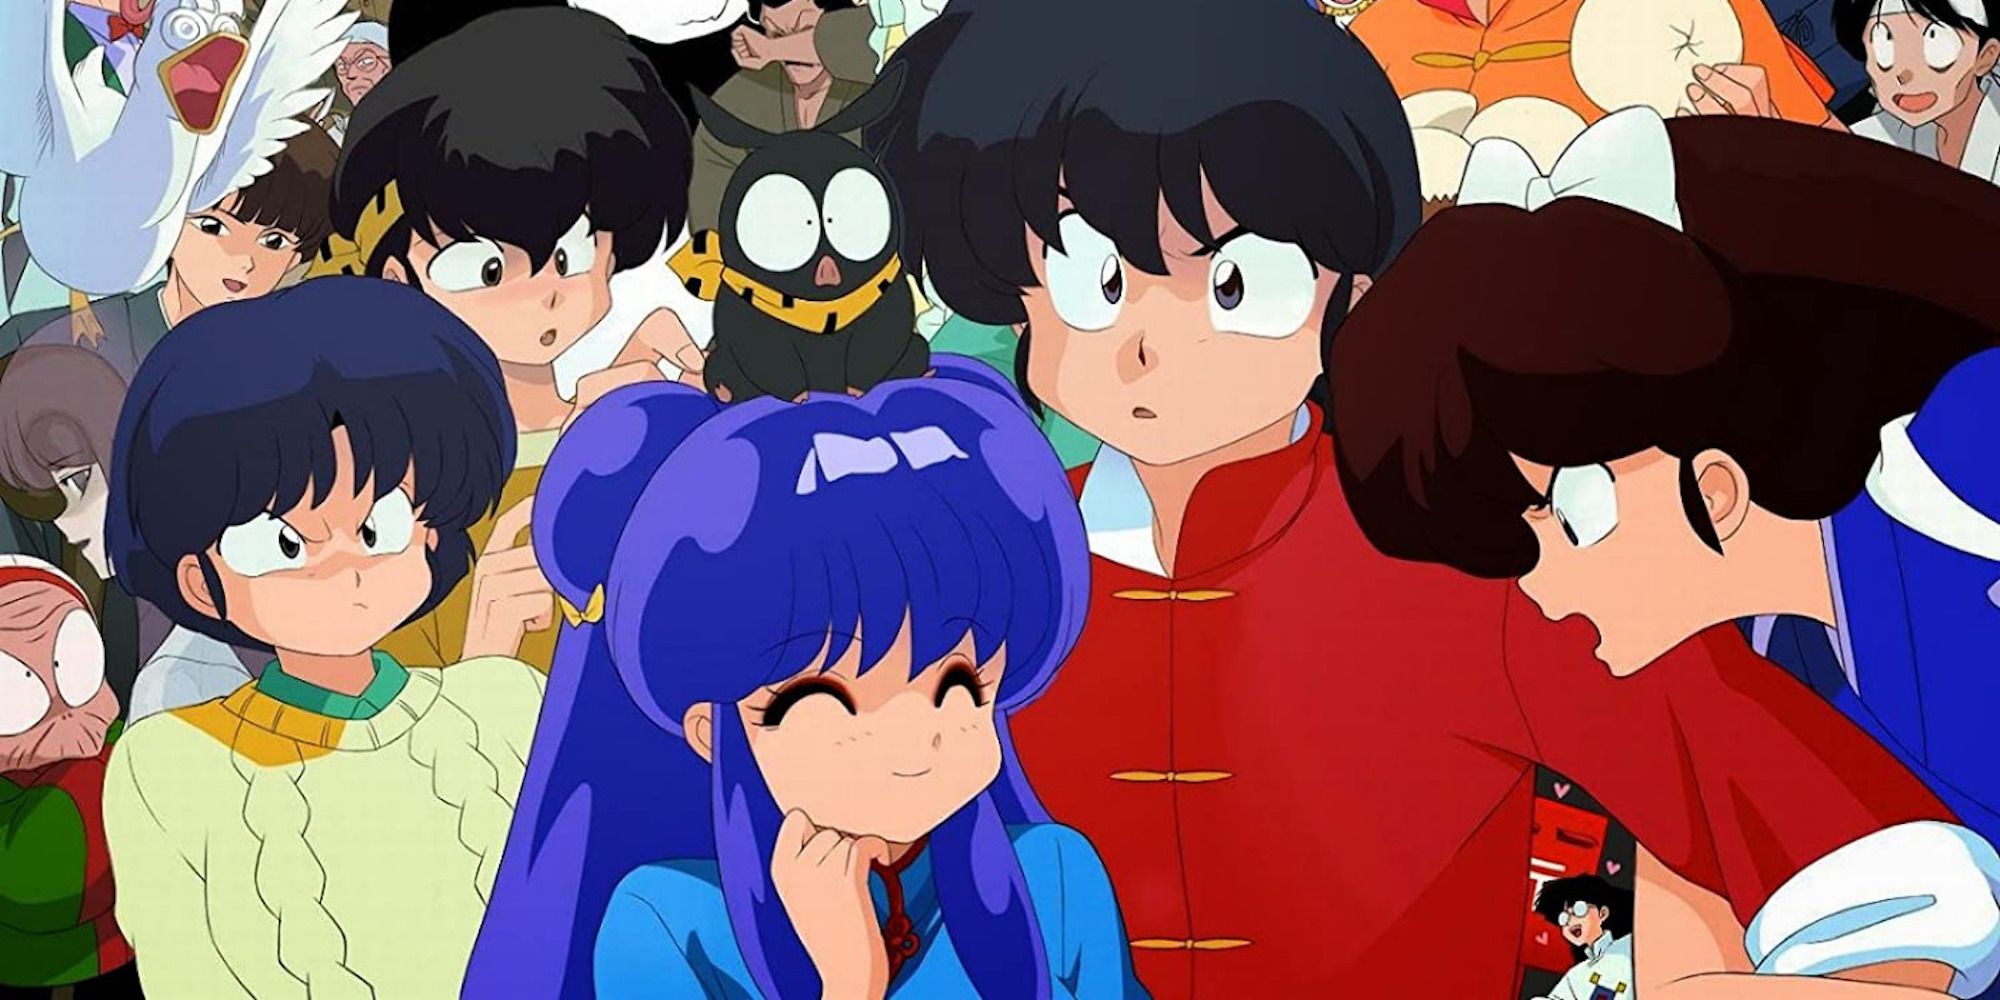 Promo art featuring characters from Ranma 1/2